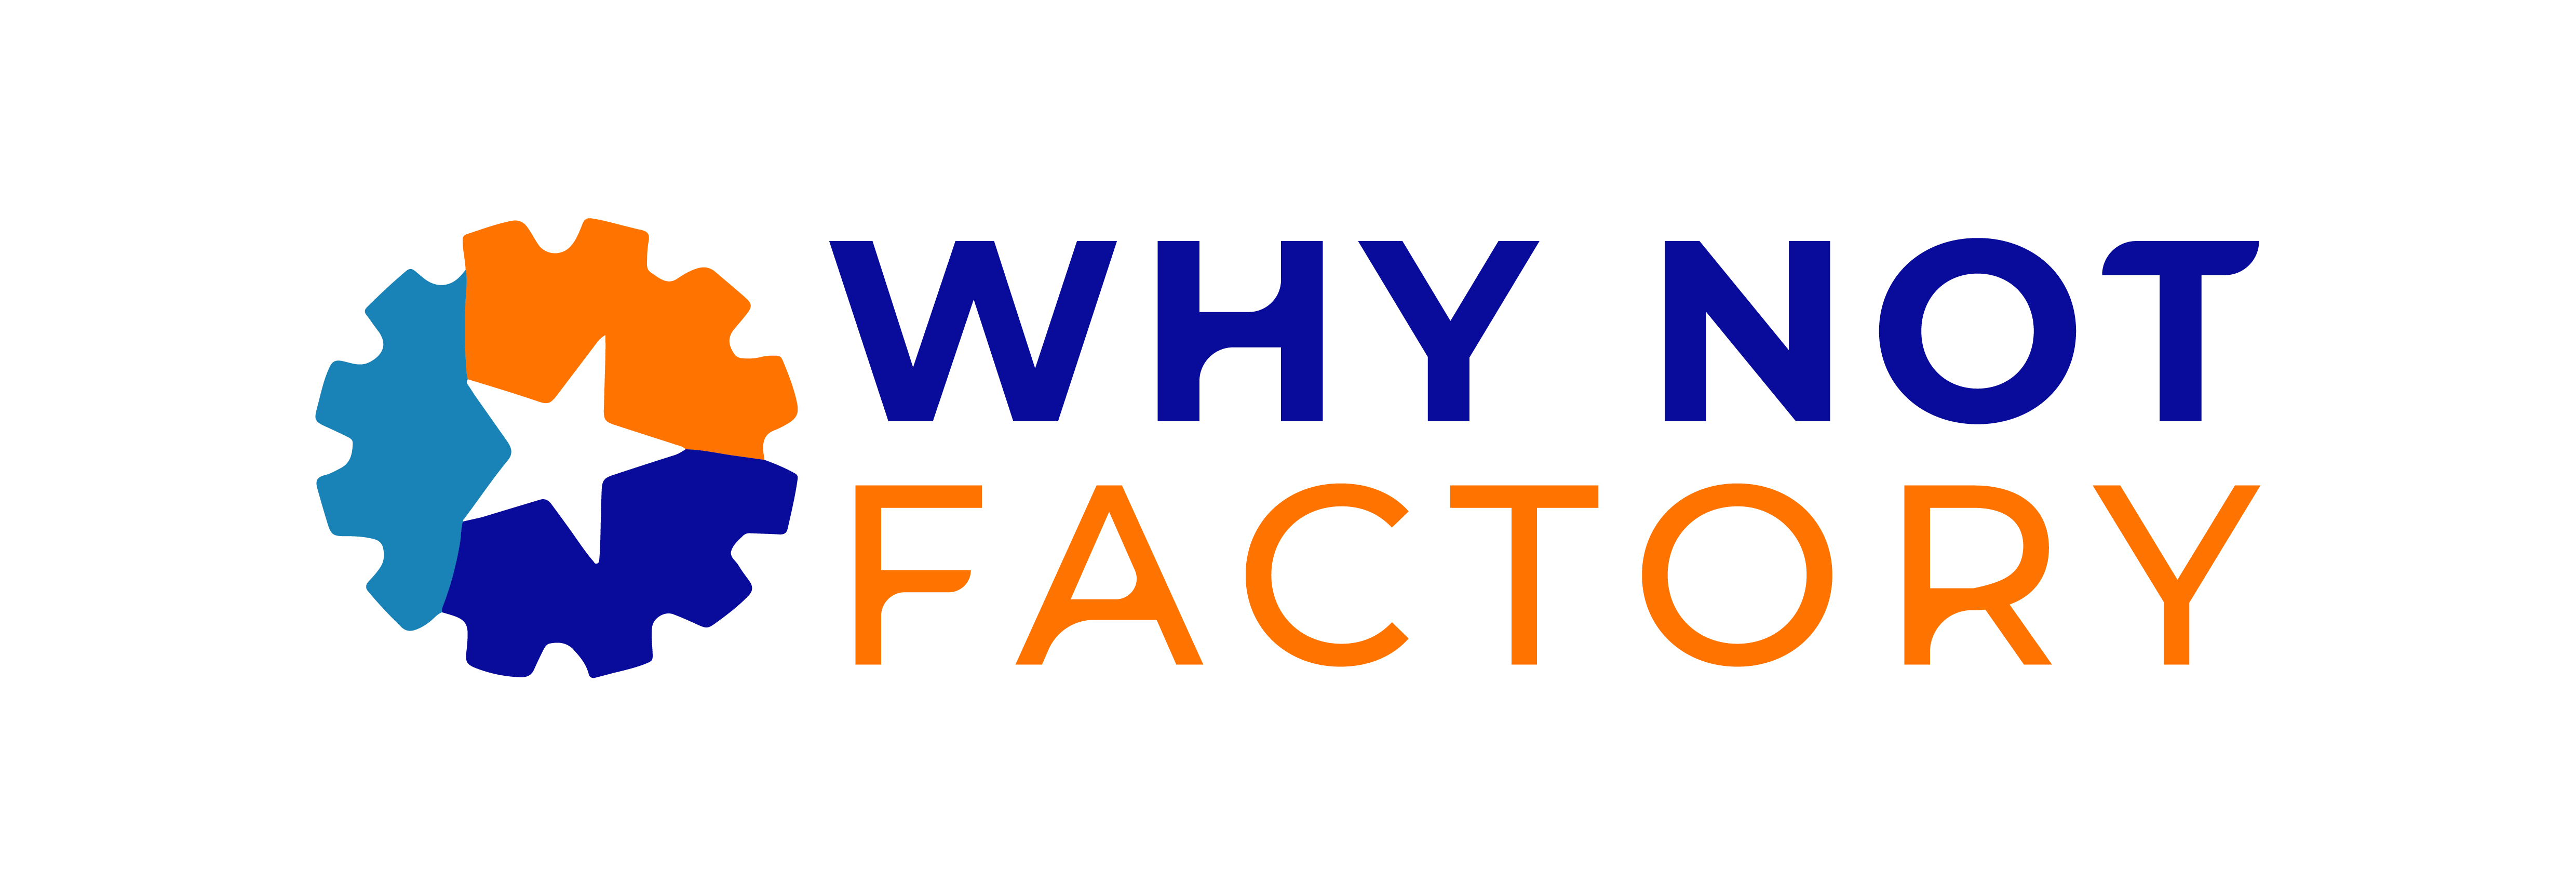 Why Not Factory Logo